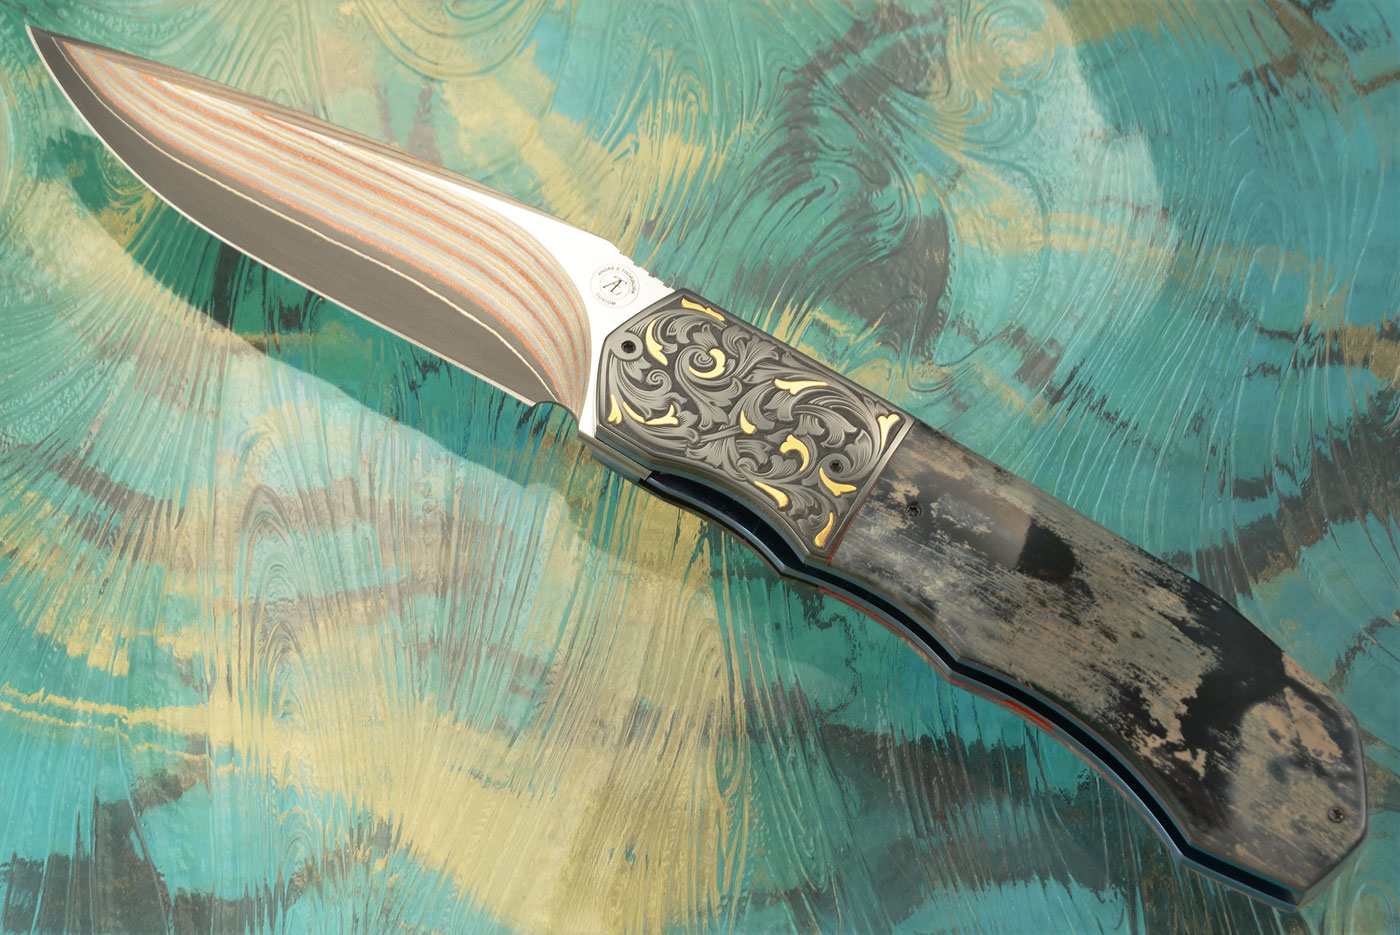 L44M Flipper with Mammoth Ivory and Engraved Zirconium - Stainless Yu-Shoku (Ceramic IKBS)